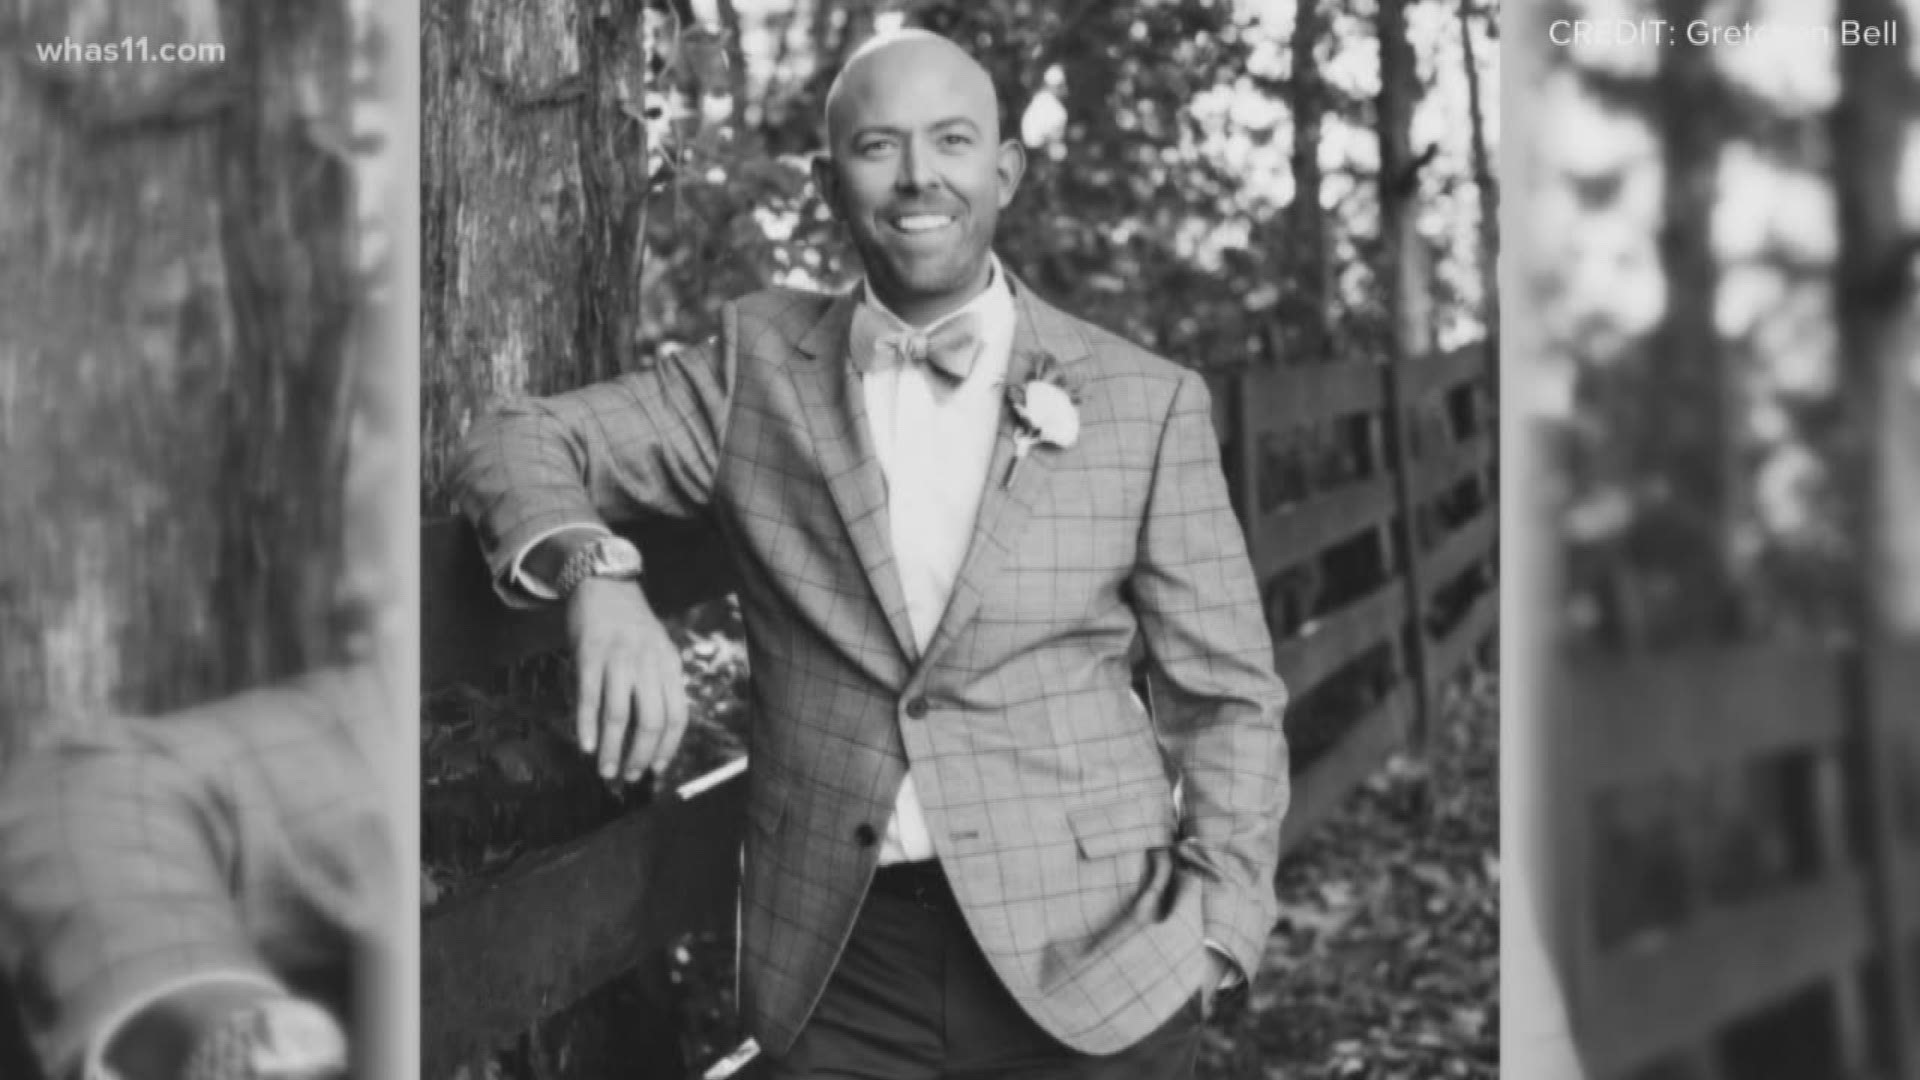 The man who died during a fight at a popular Louisville bar had just gotten married a few months ago. Friends and family are in shock at the death of Chris McKinney.